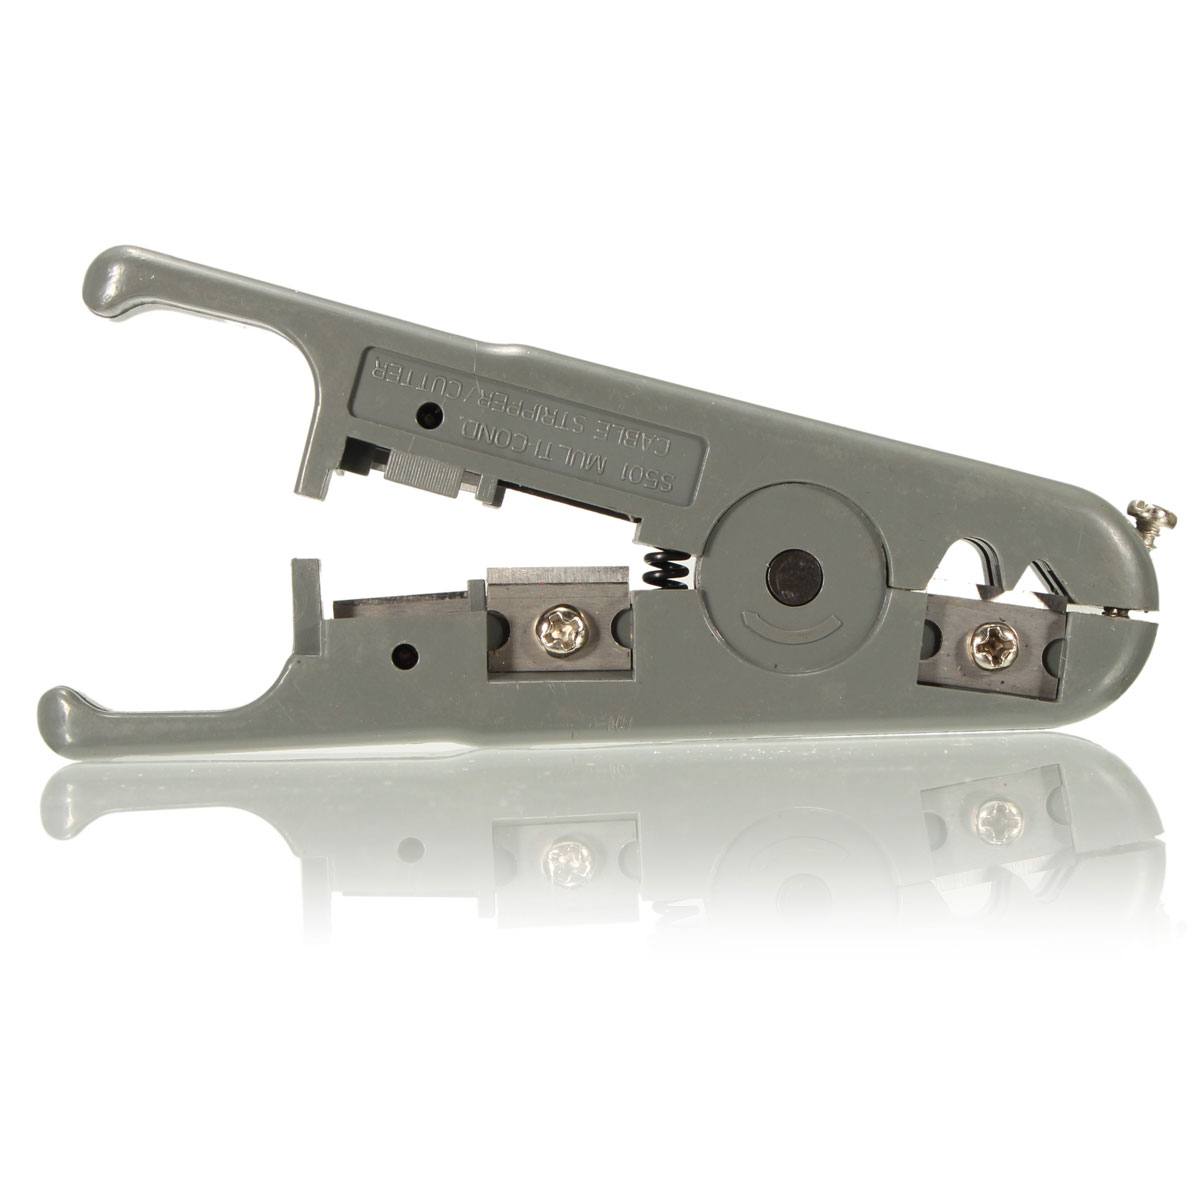 RJ45-RJ11-Cat6-Cat5-Punch-Down-Network-Phone-LAN-UTP-Cable-Cutter-Wire-Stripper-1030522